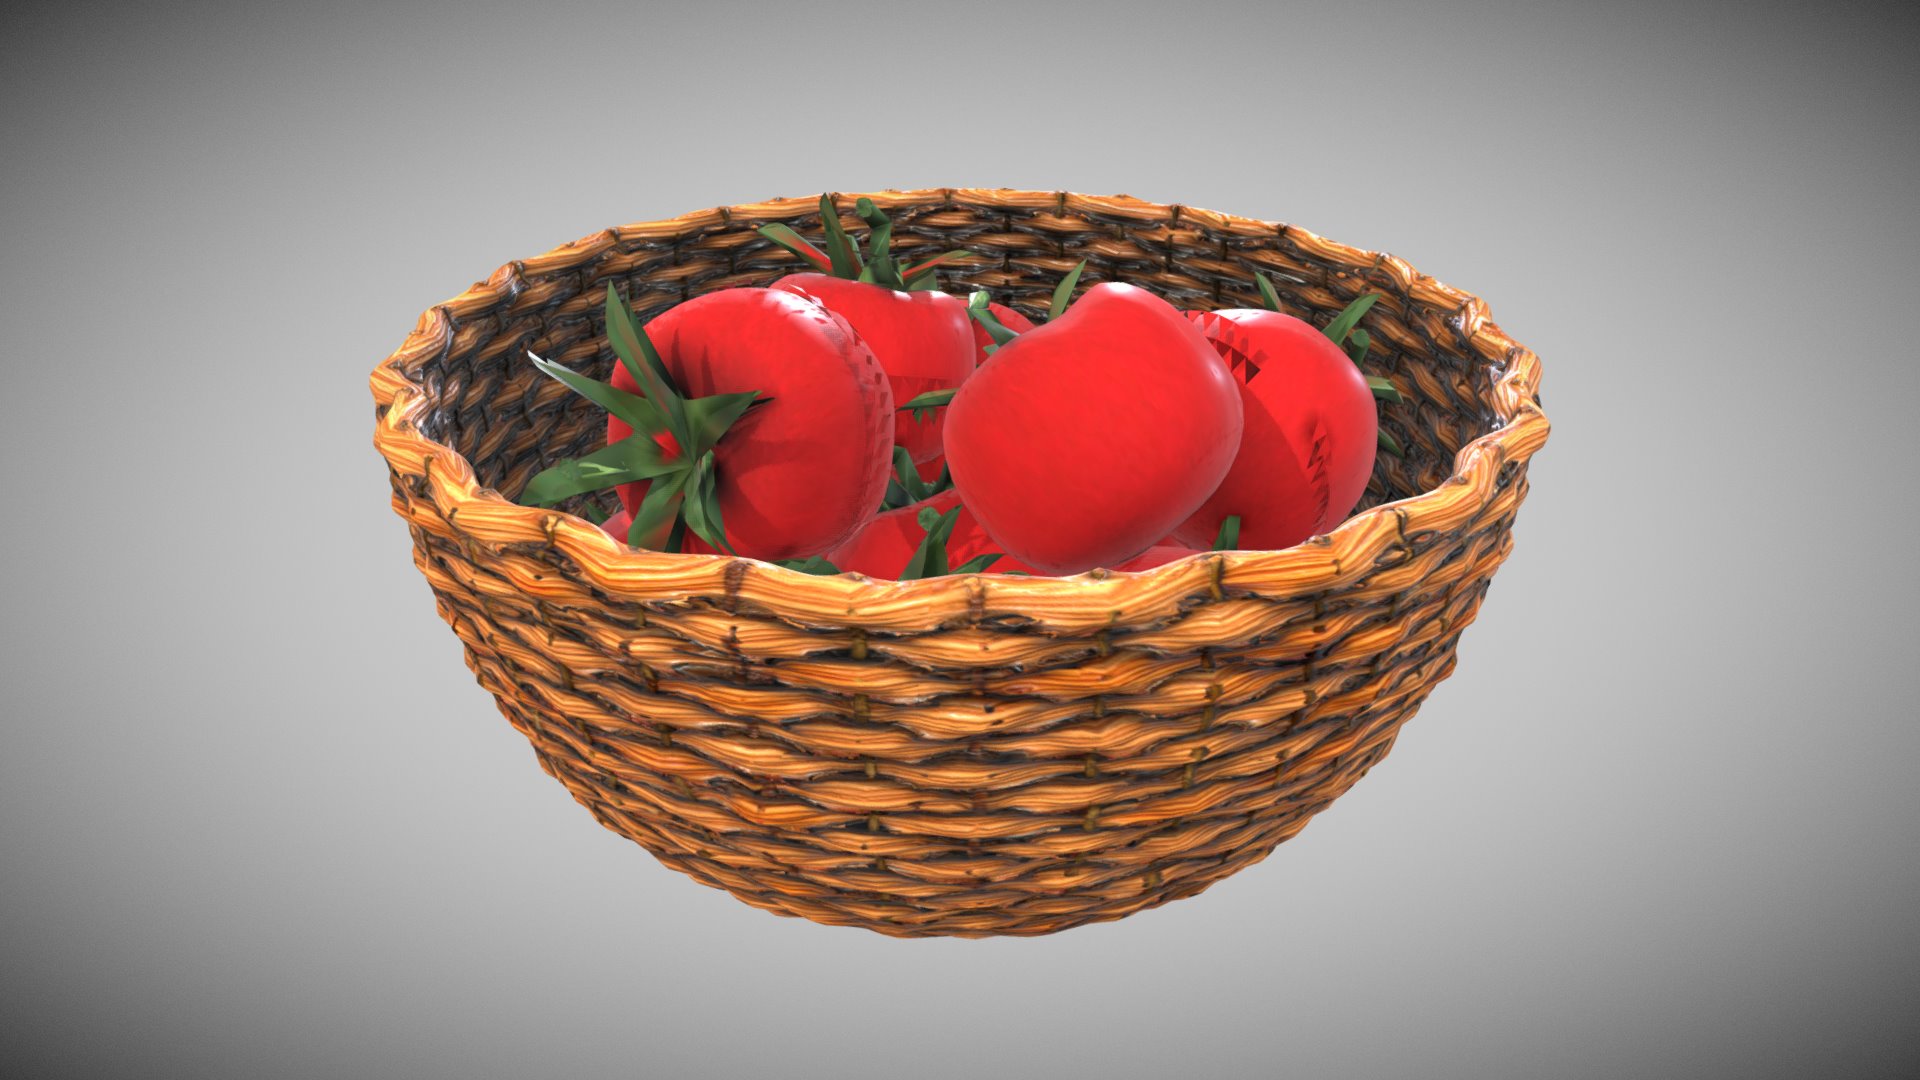 3D model Tomatoes Basket - This is a 3D model of the Tomatoes Basket. The 3D model is about a basket of red and green tomatoes.